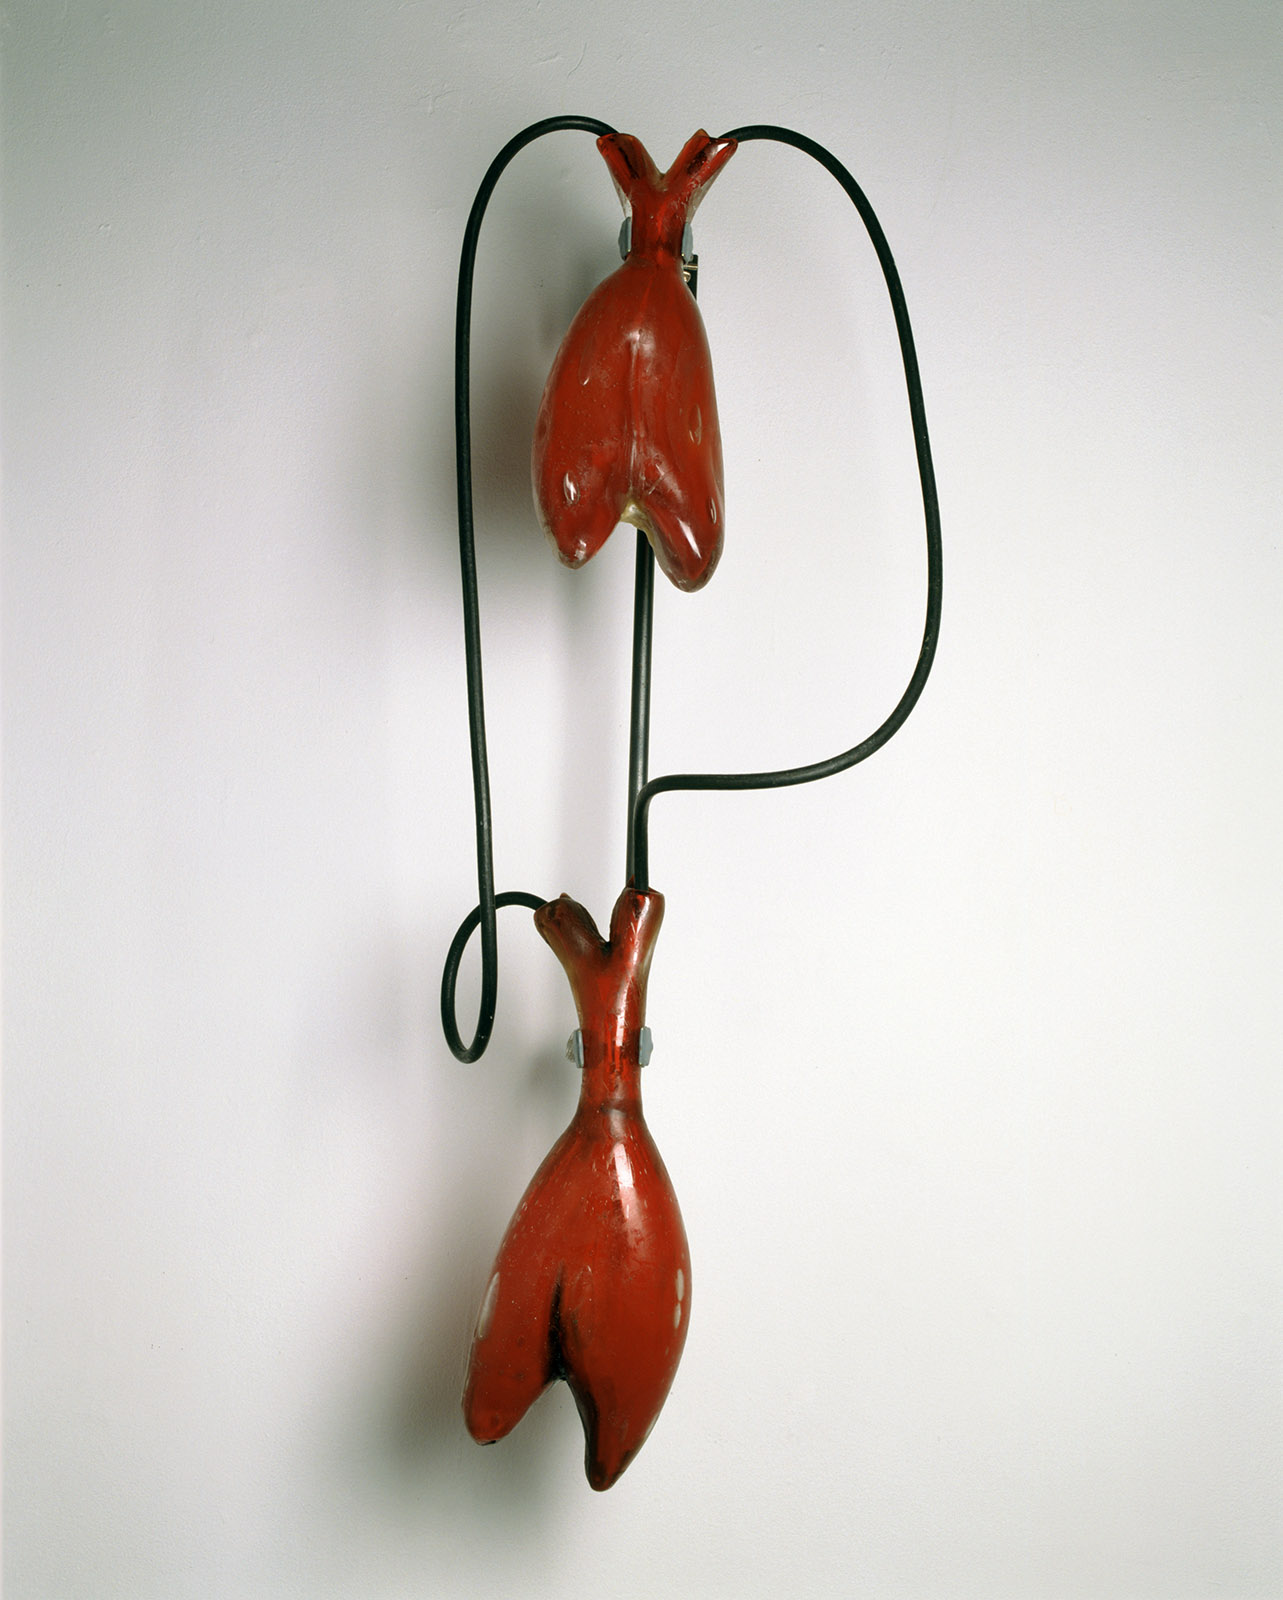 Eve Andrée Laramée, Breathing into Each-Others Lungs, 1994